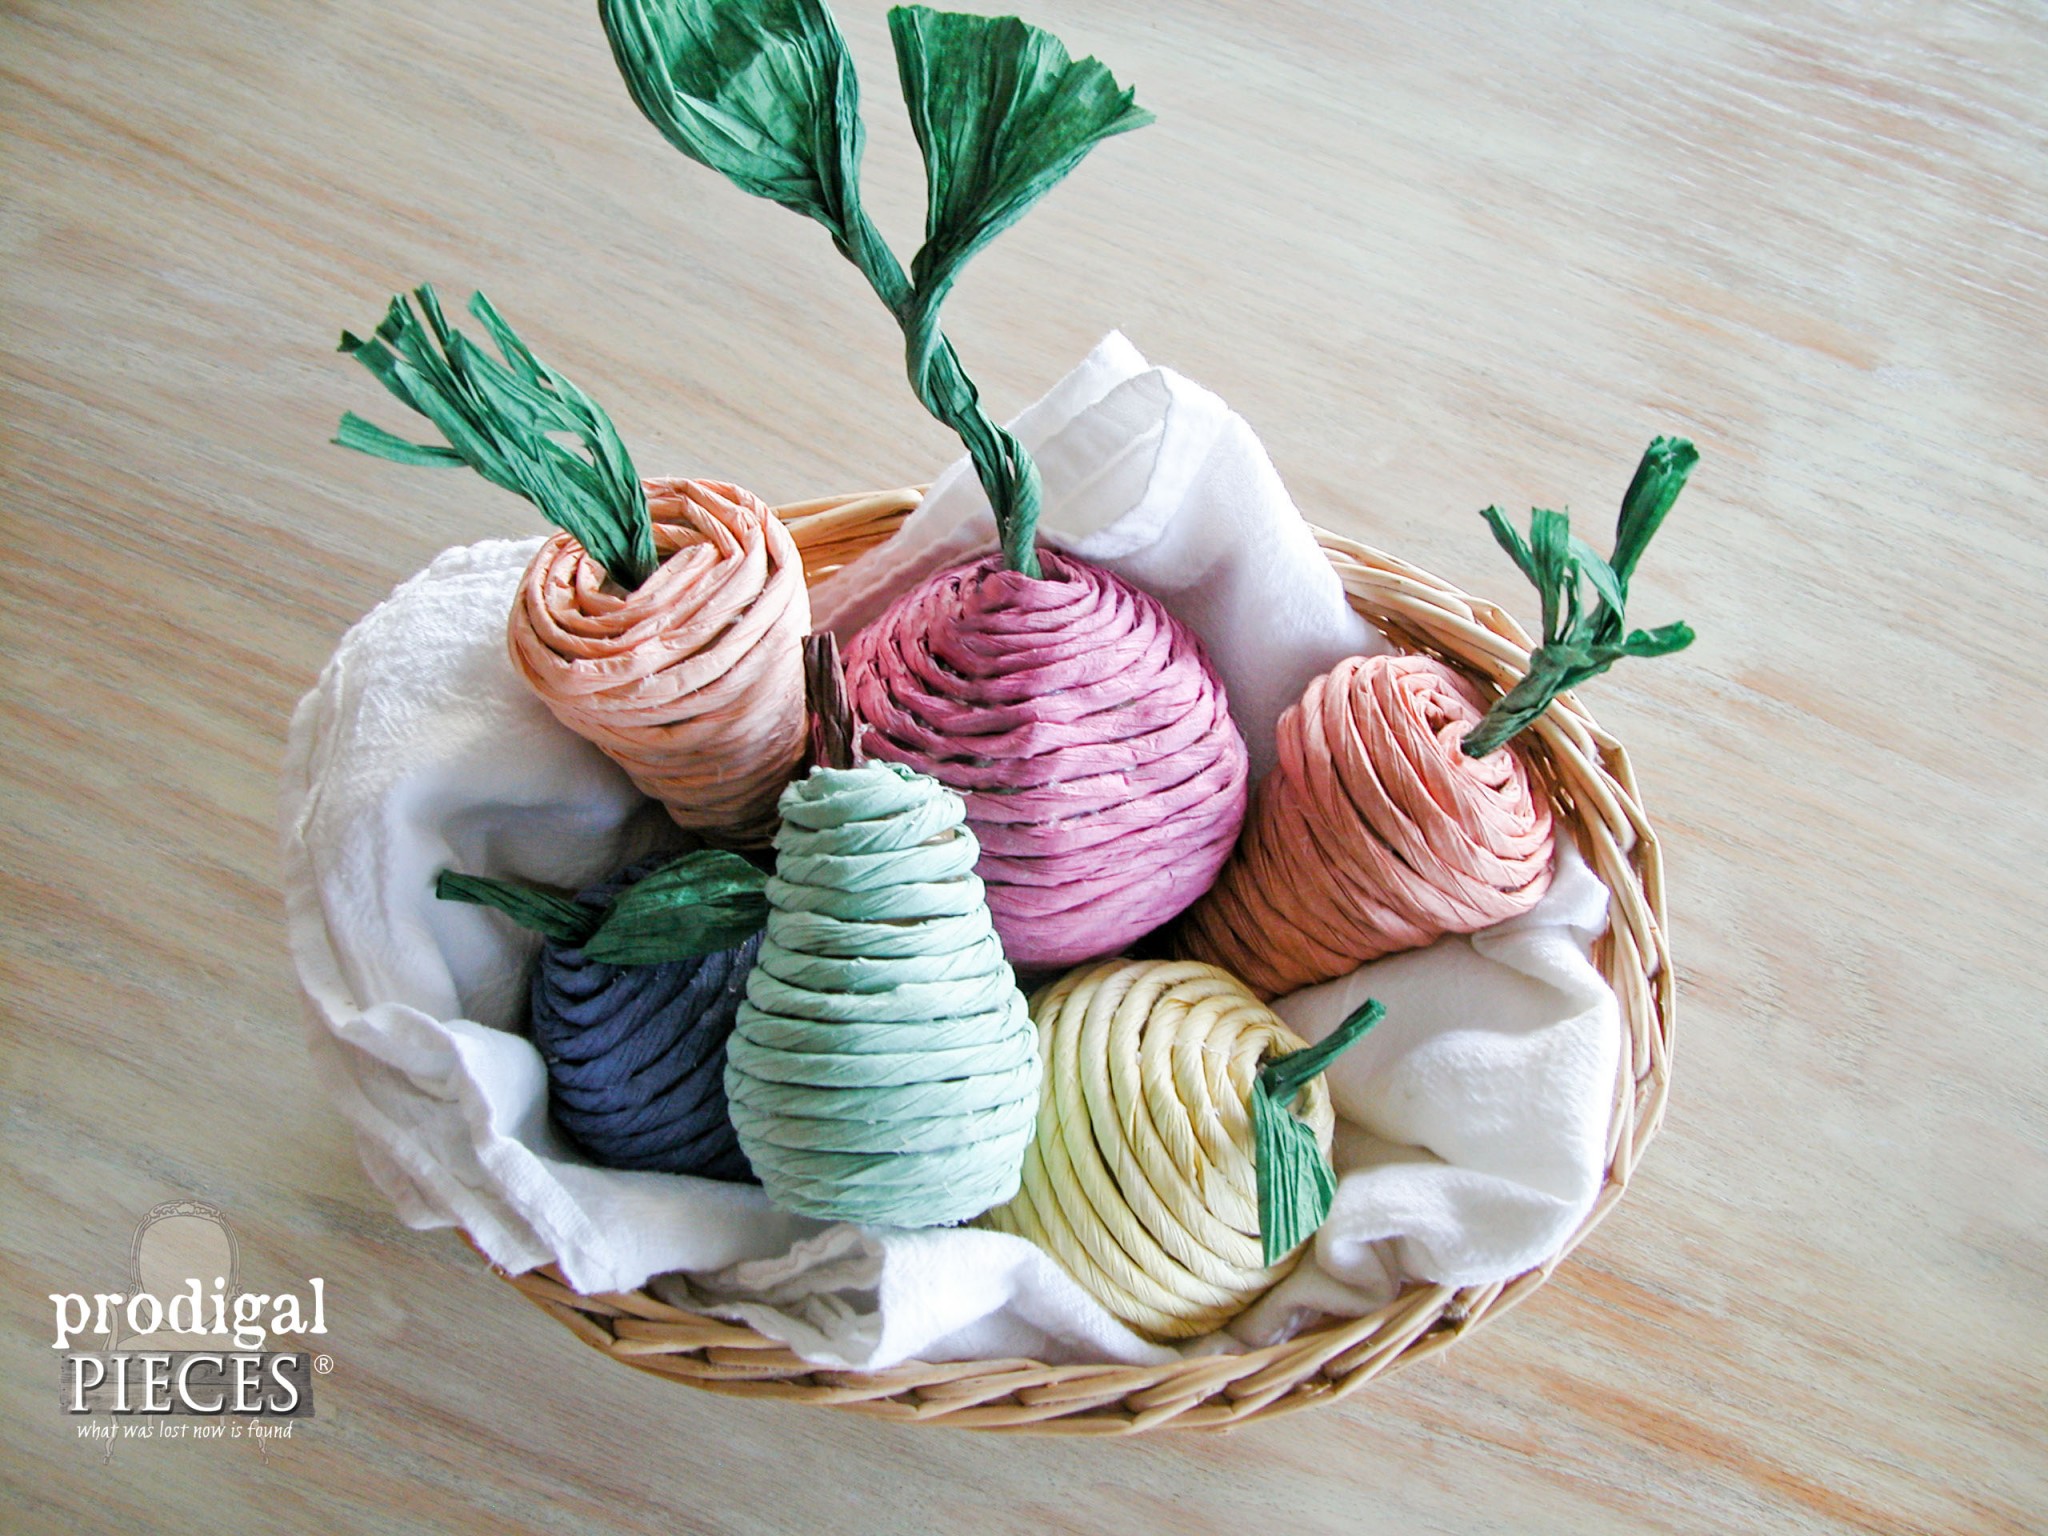 Assorted Basket of DIY Natural Cat Toys by Prodigal Pieces | prodigalpieces.com